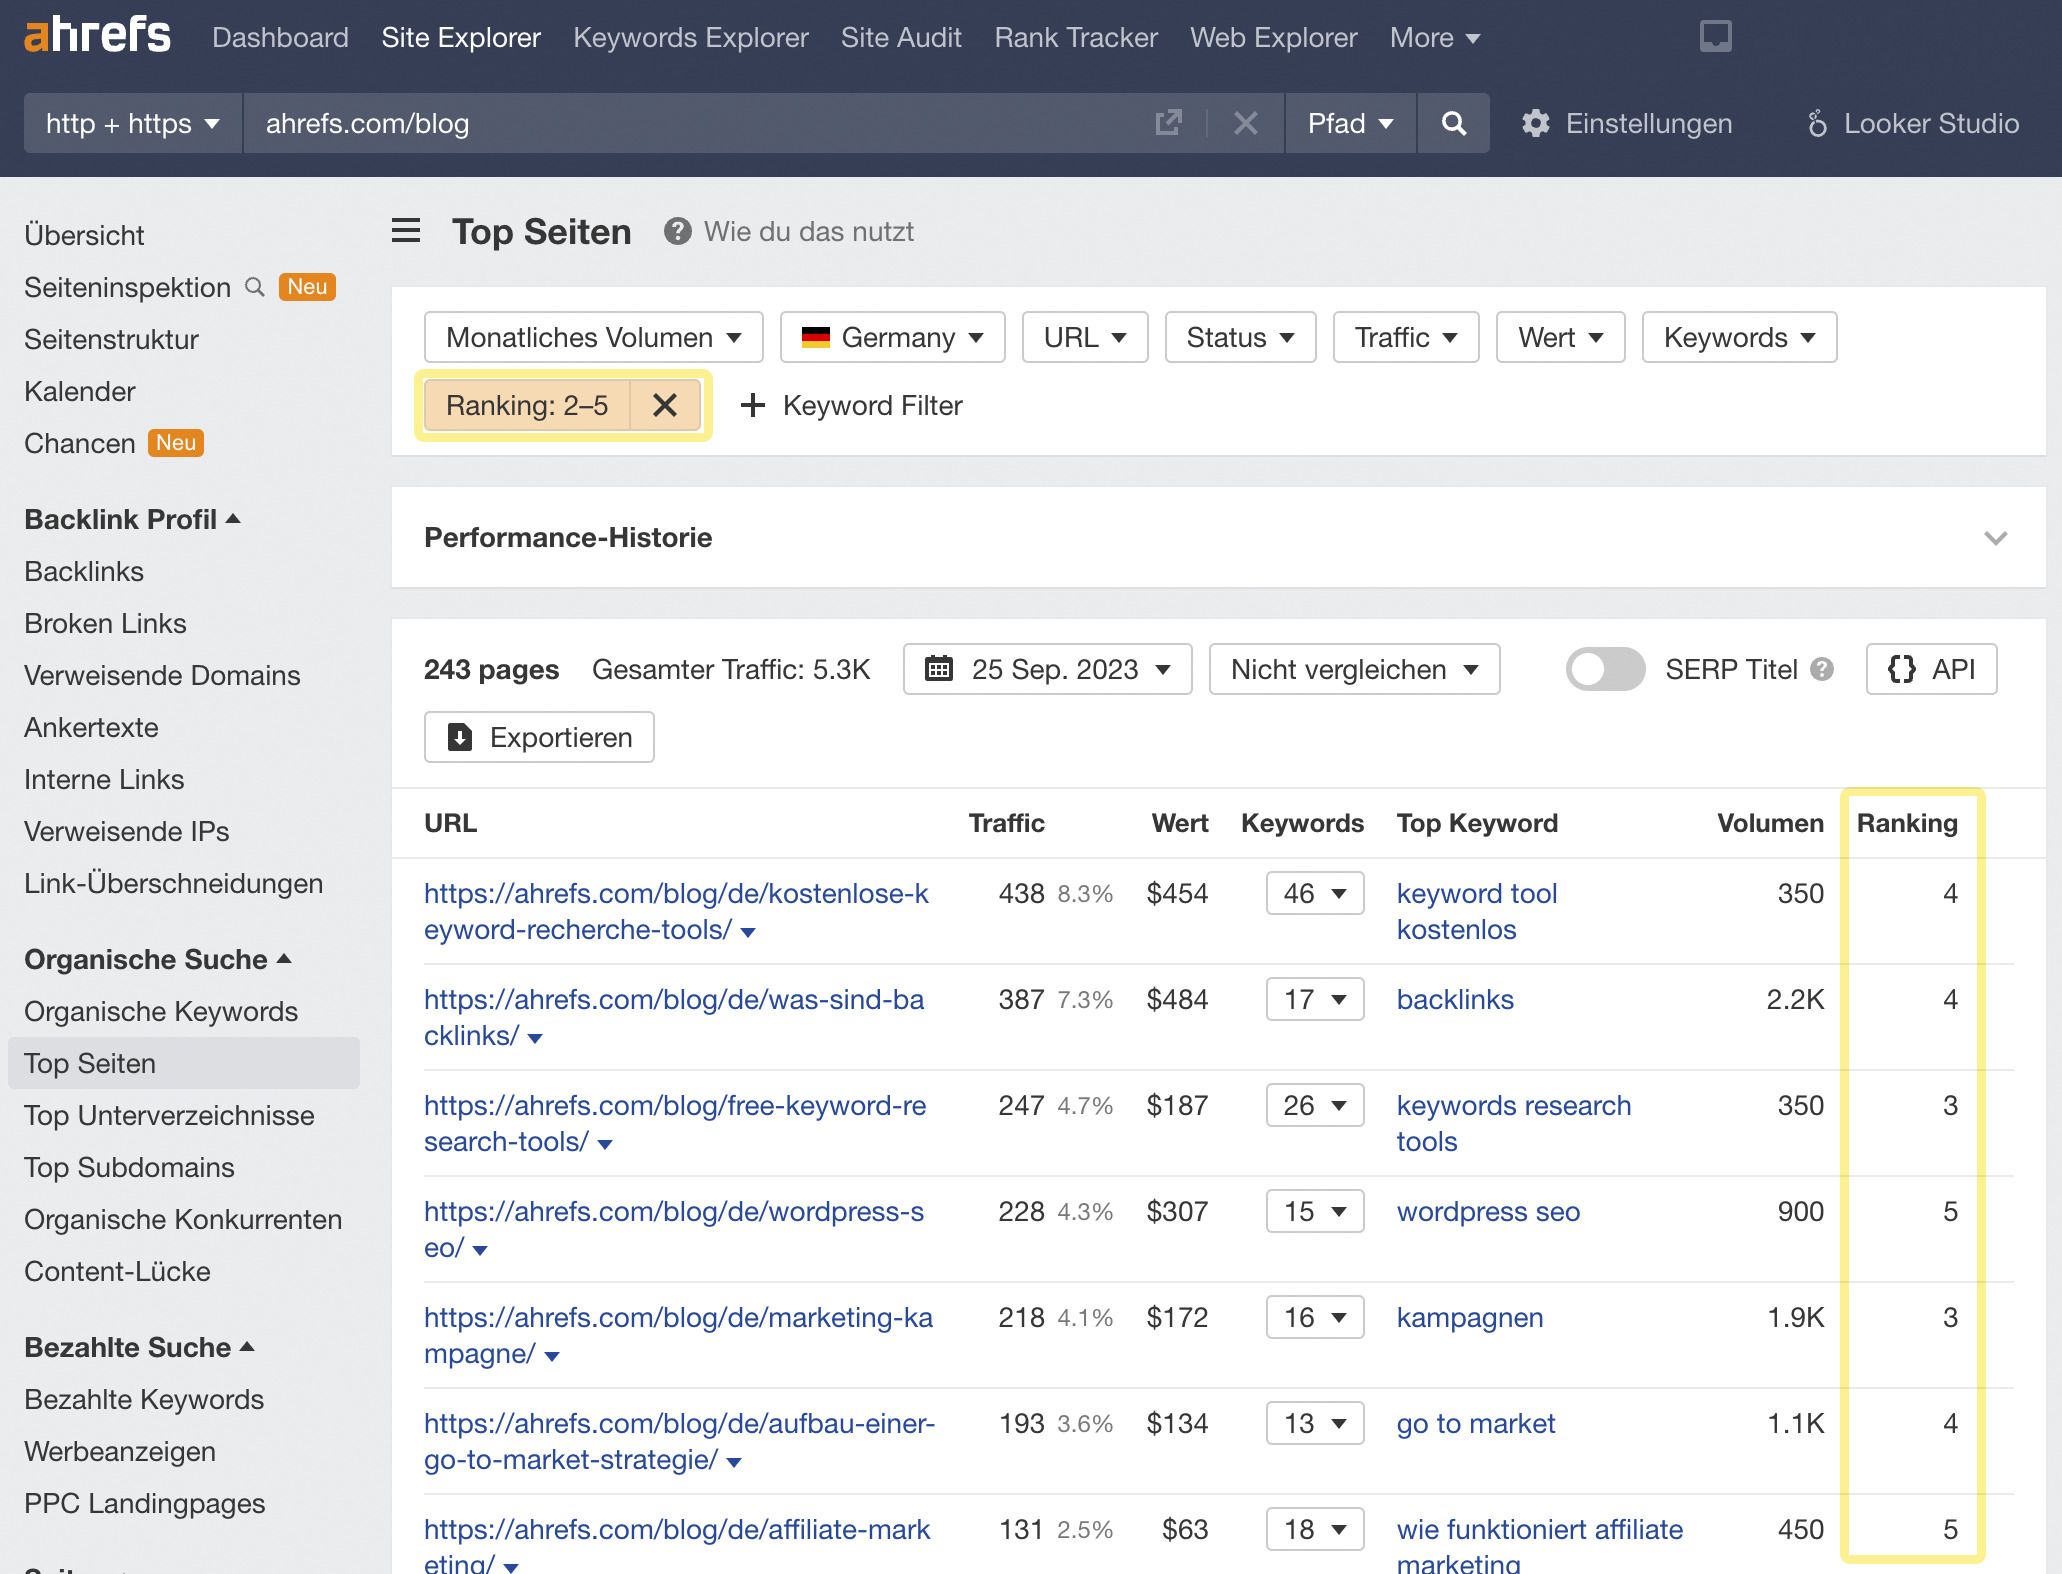 Finding pages to optimize title tags, via Ahrefs' Site Explorer